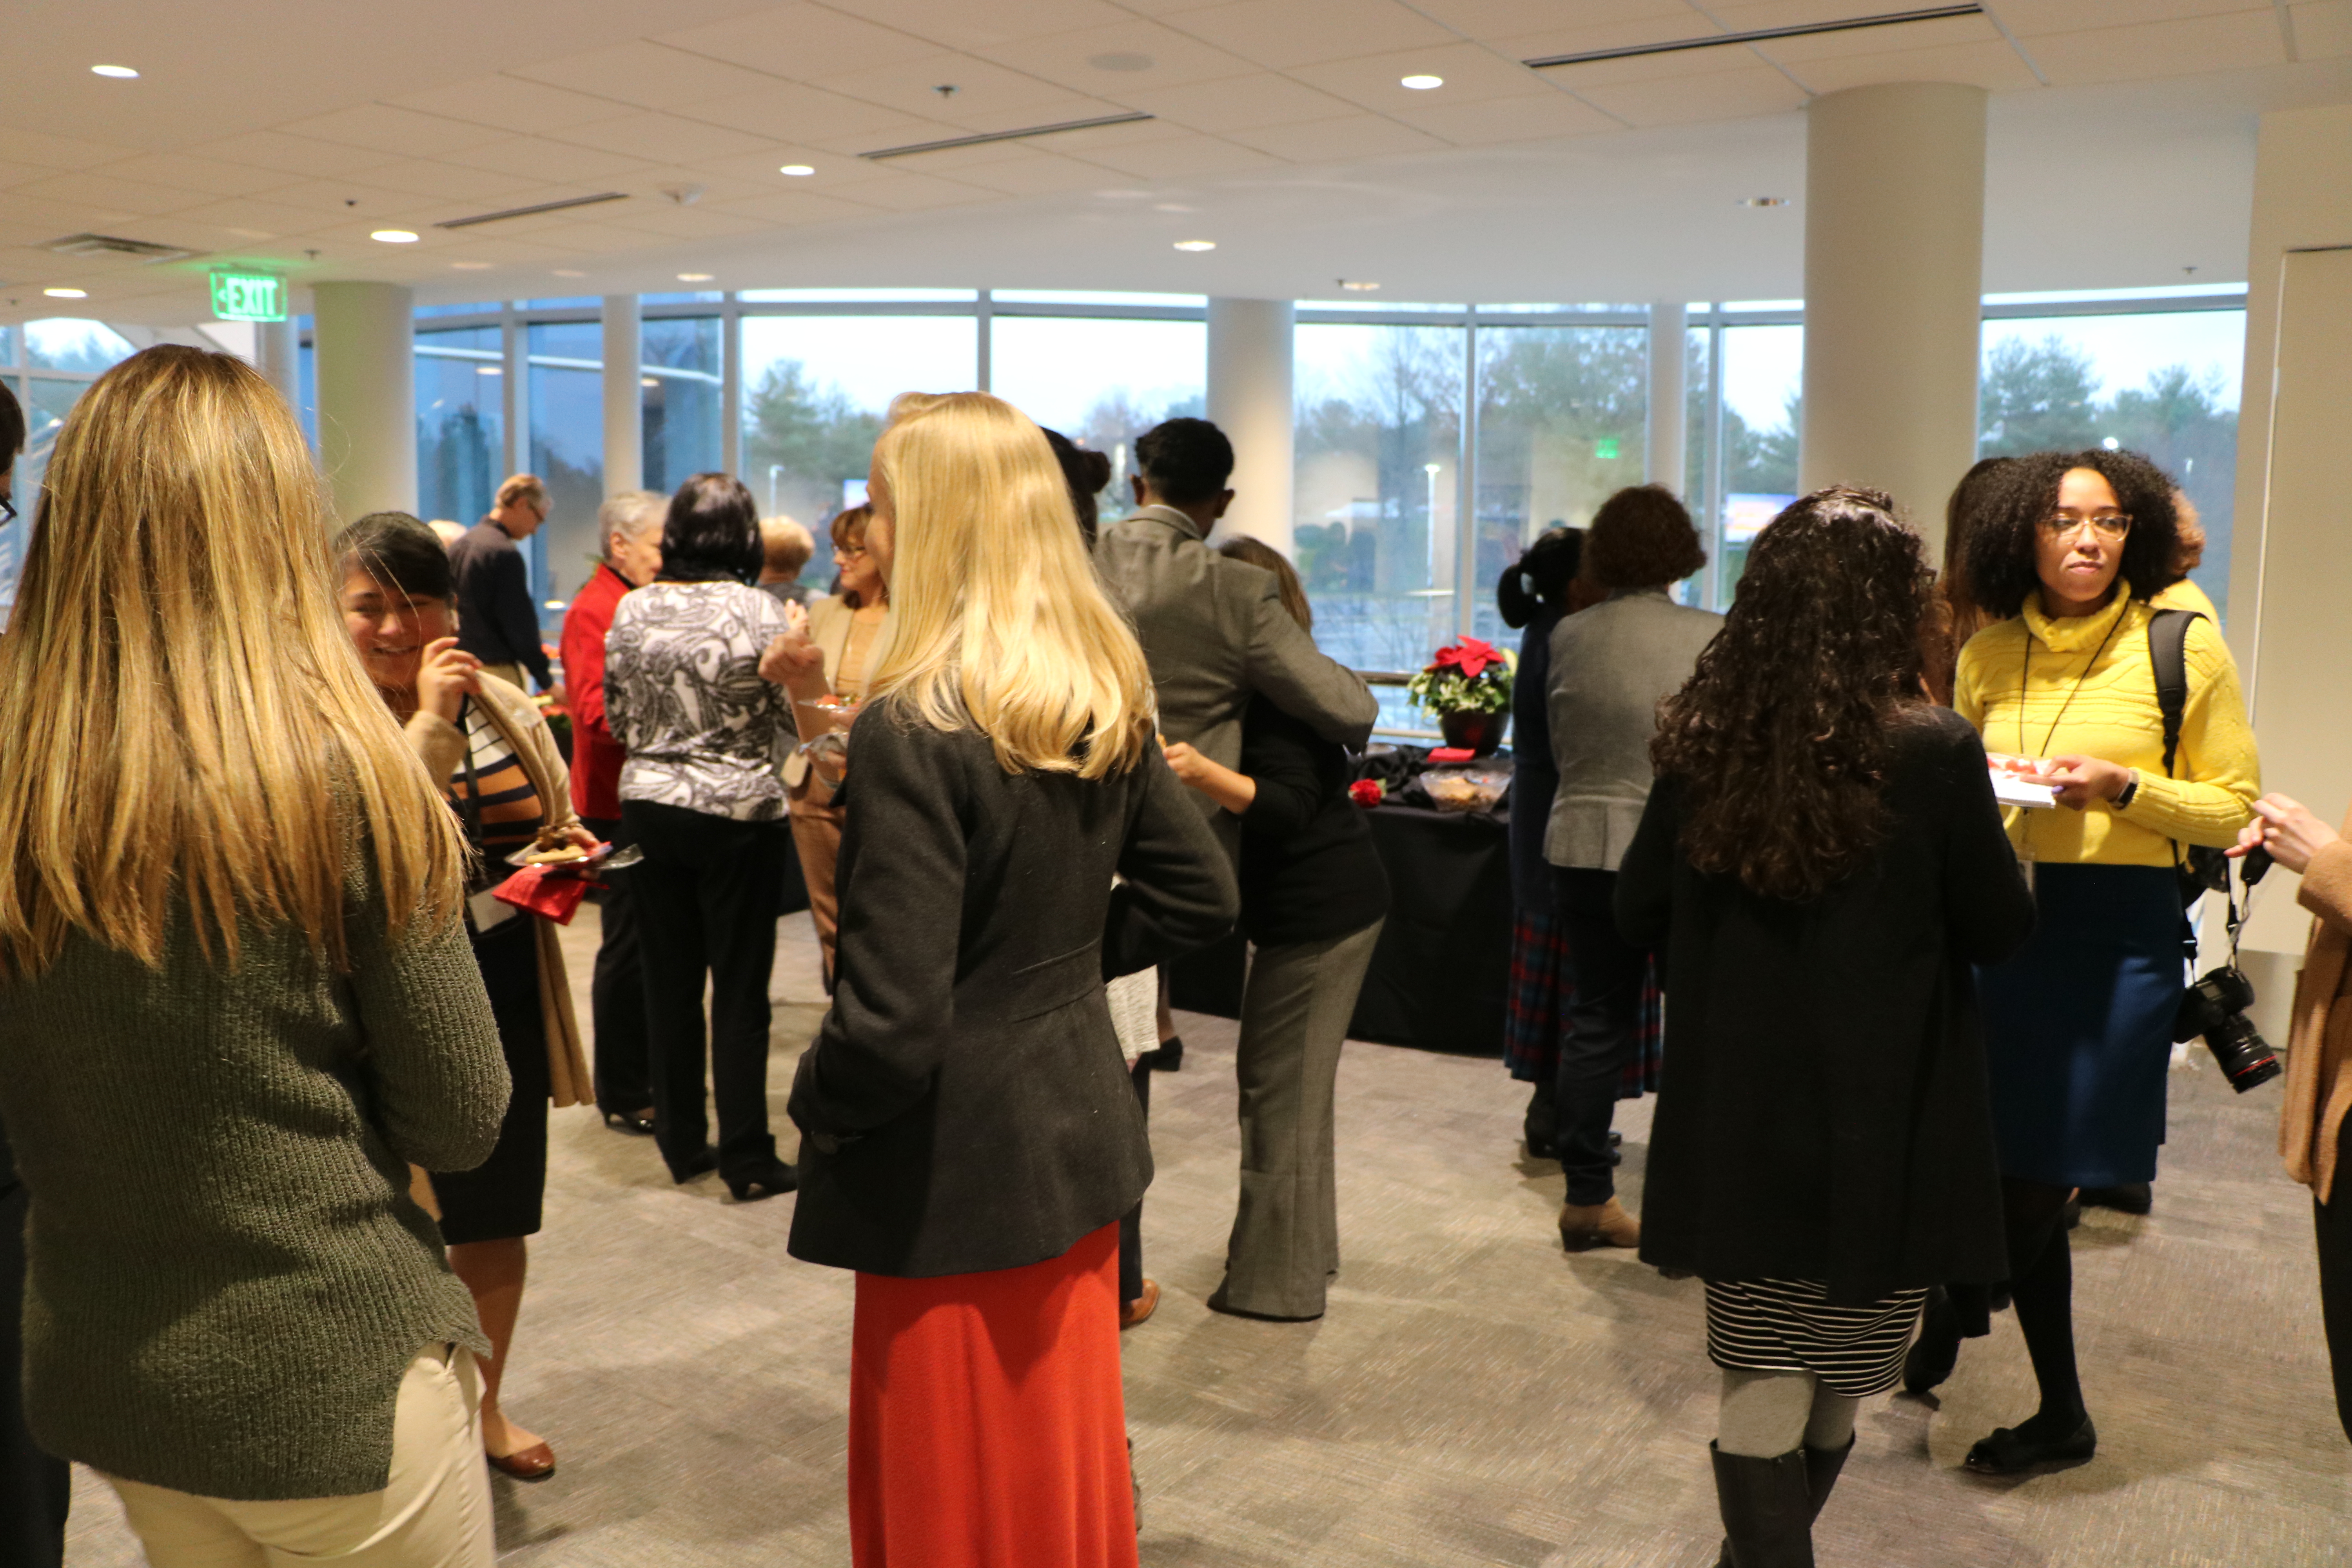 PSI Celebrating National Philanthropy Day, November 14th with our co-workers at NAD Headquarters.